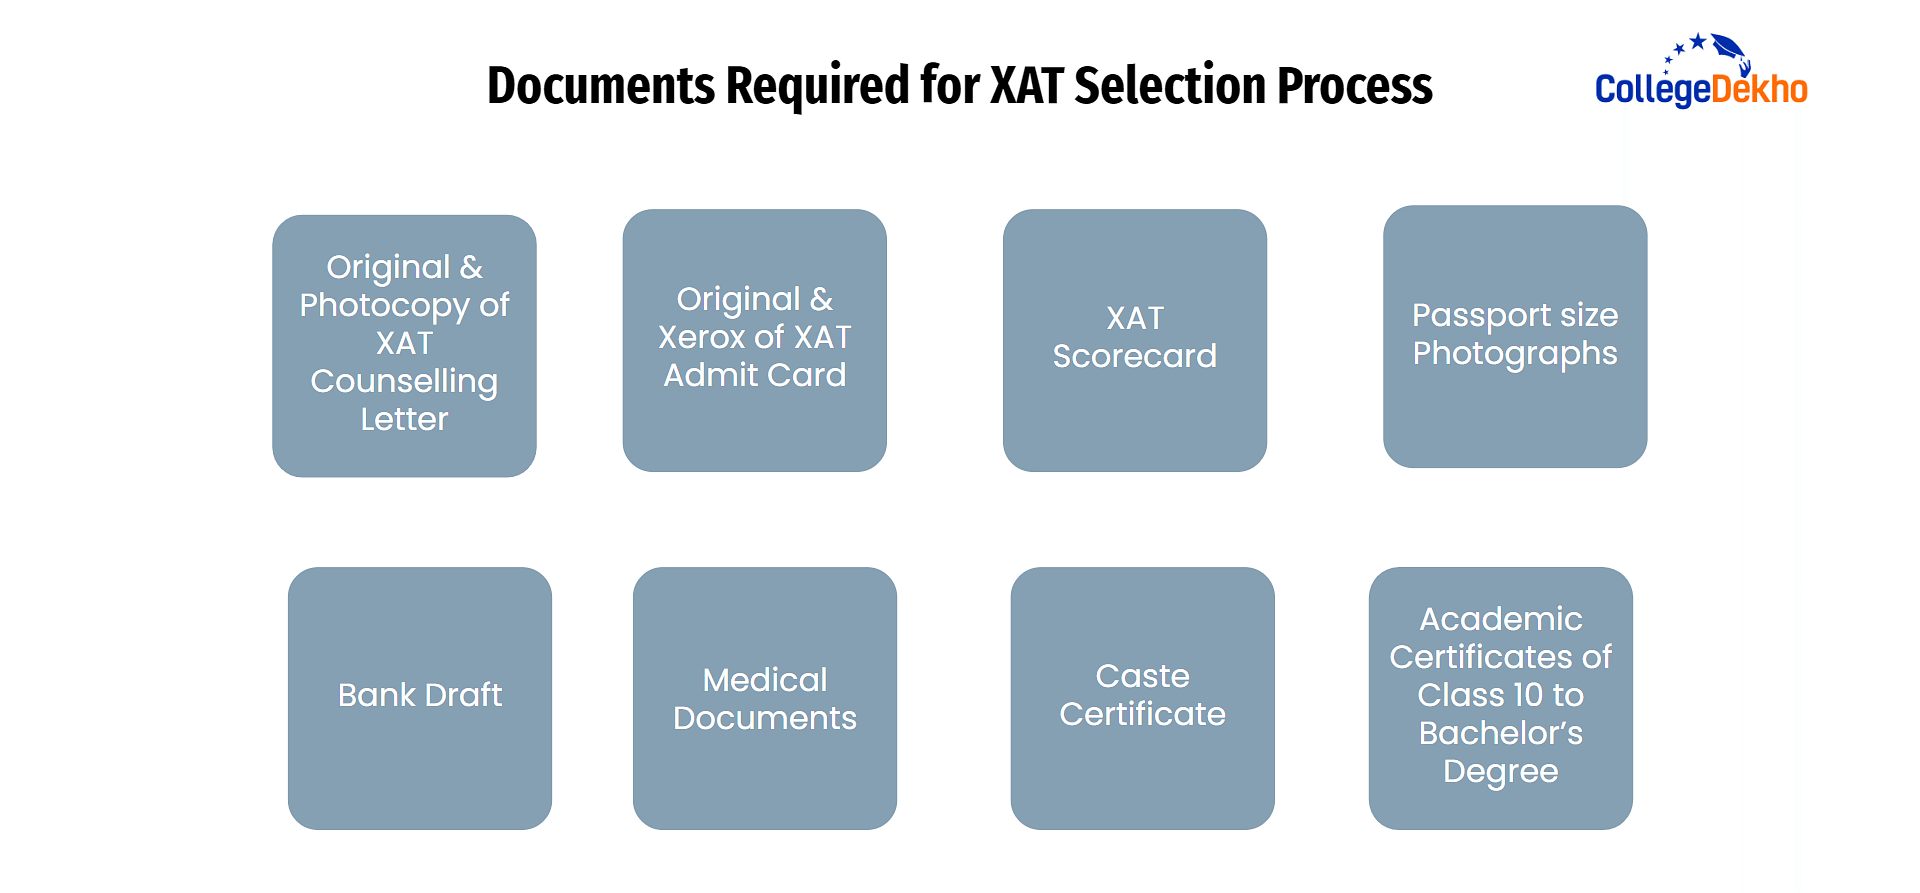 Documents Required for XAT Selection Process